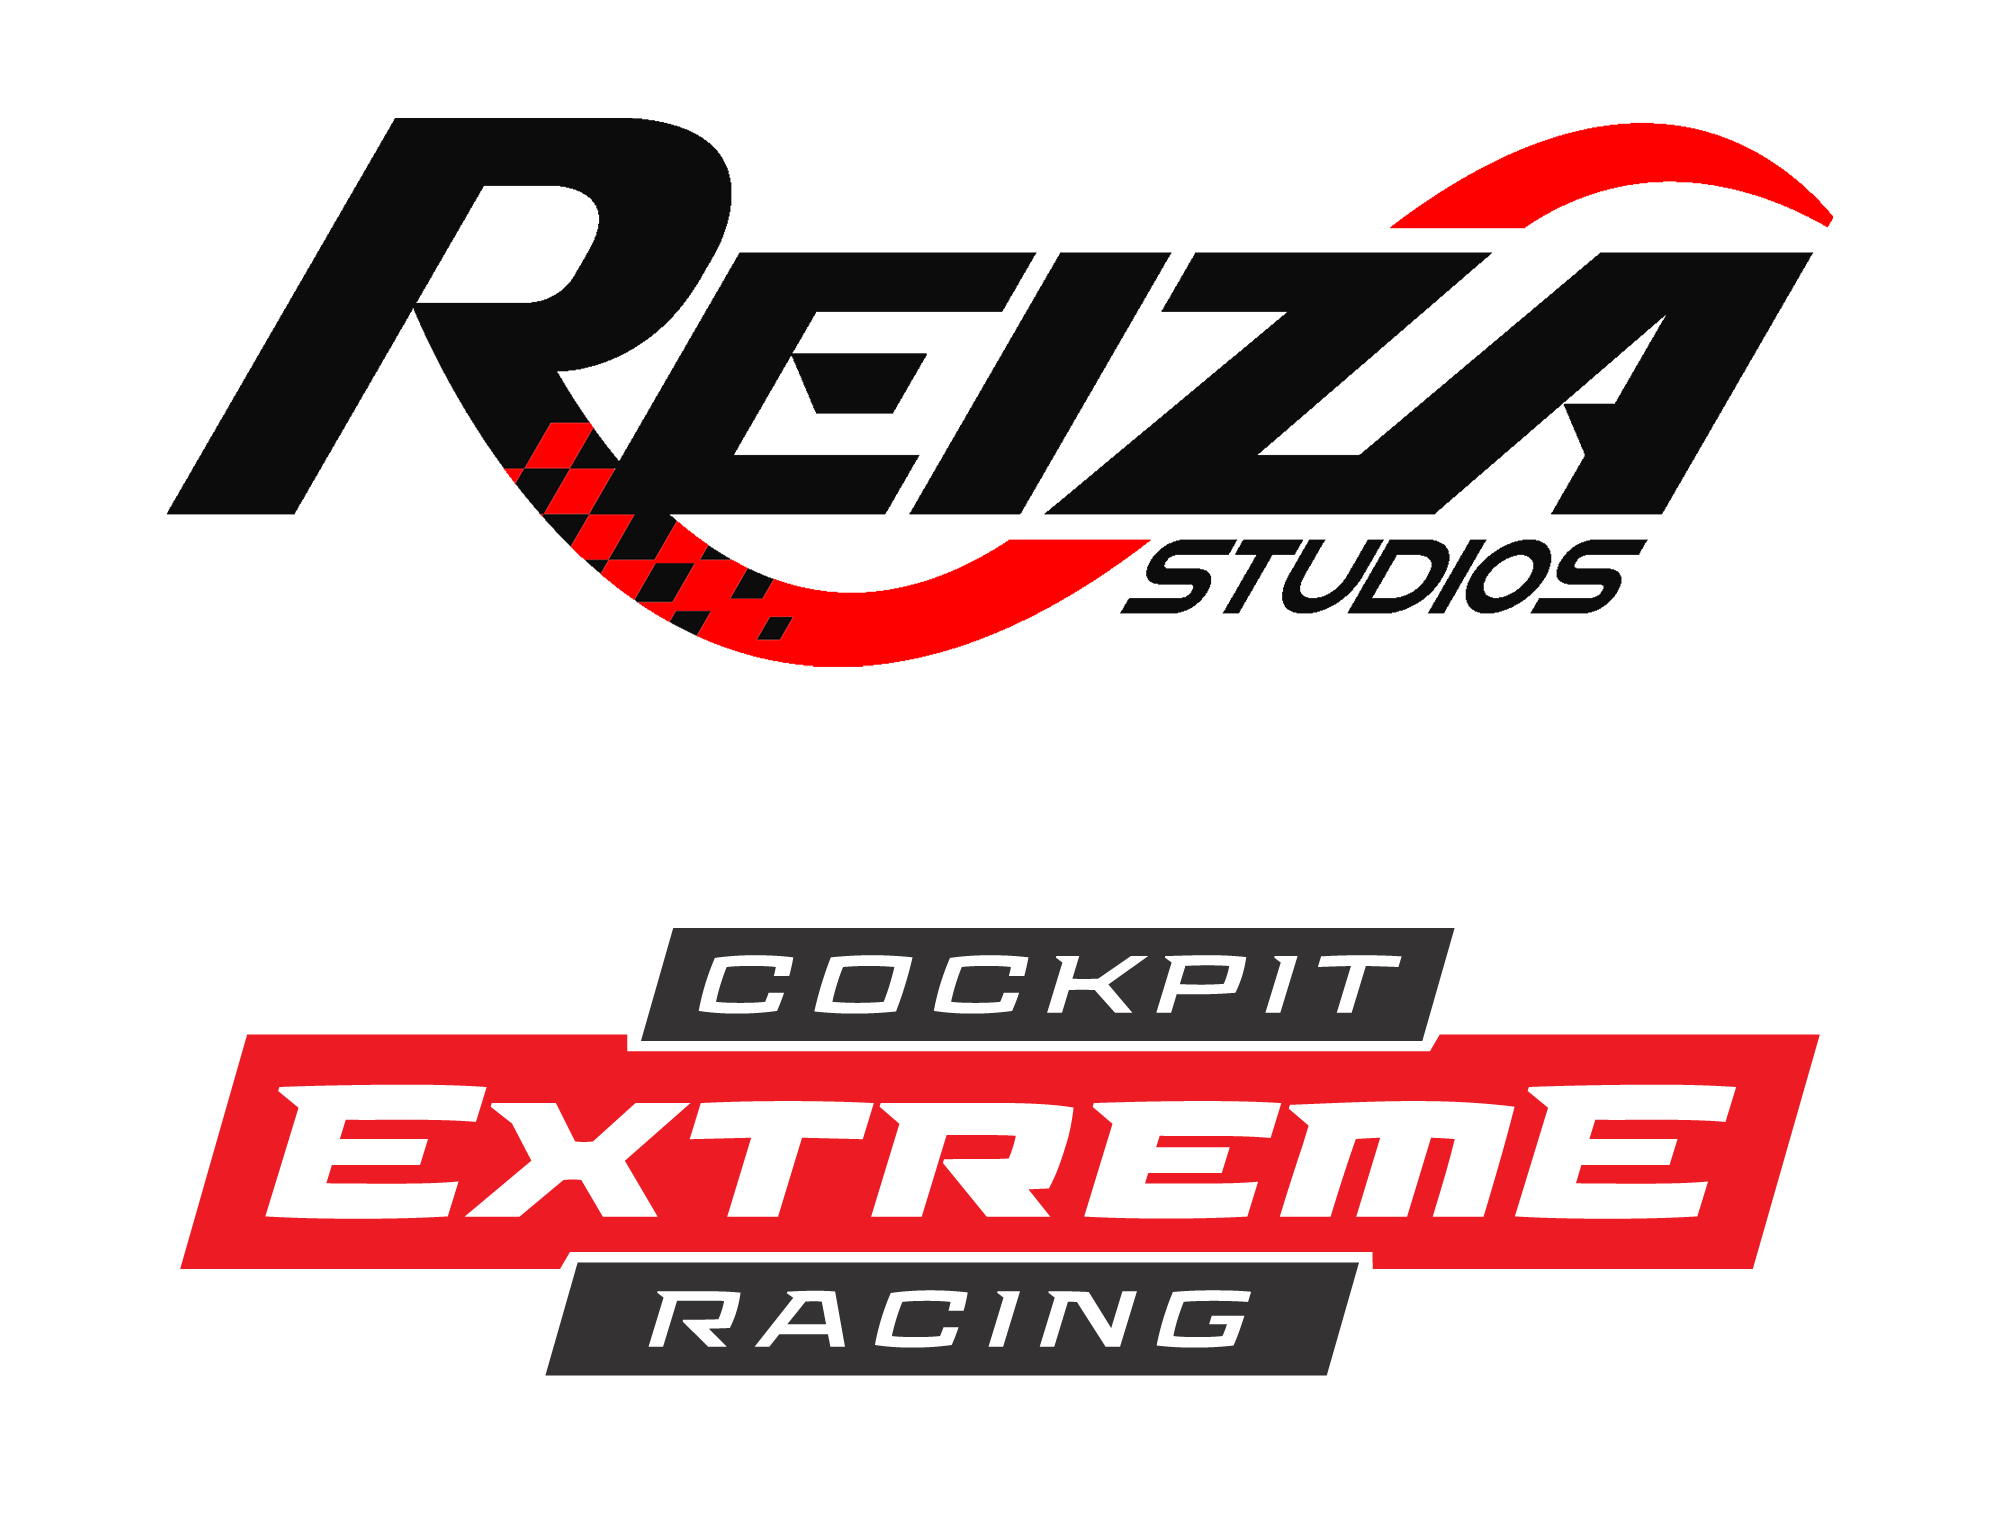 Racing Game Logo - Game Stock Car Extreme Vee Painting Contest Sim